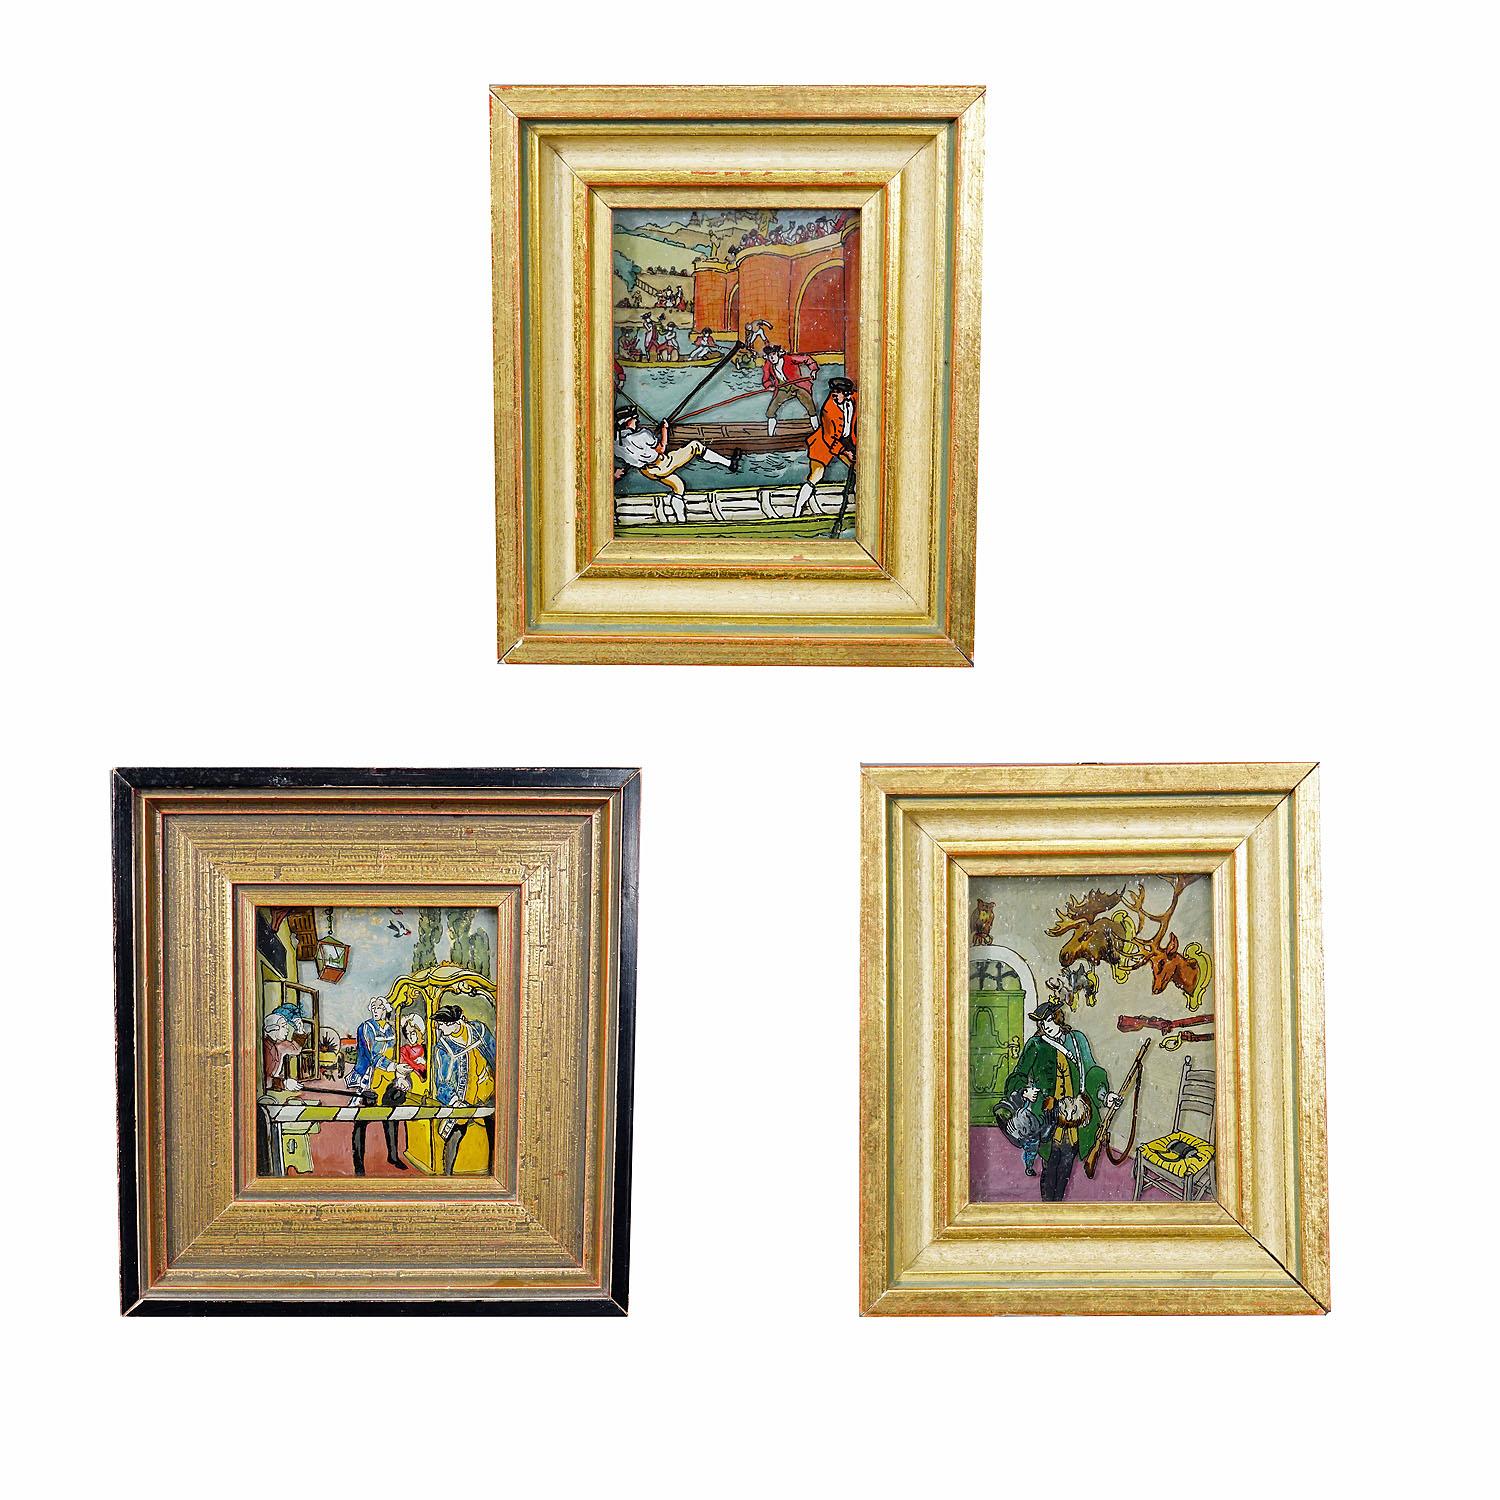 Three Vintage Behind Glass Paintings with Biedermeier Scenes

A set of three behind glass paintings depicting scenes from the Biedermeier period. Handpainted in Germany ca. 1950s and framed with wooden gilded frames.

artfour is an owner-managed